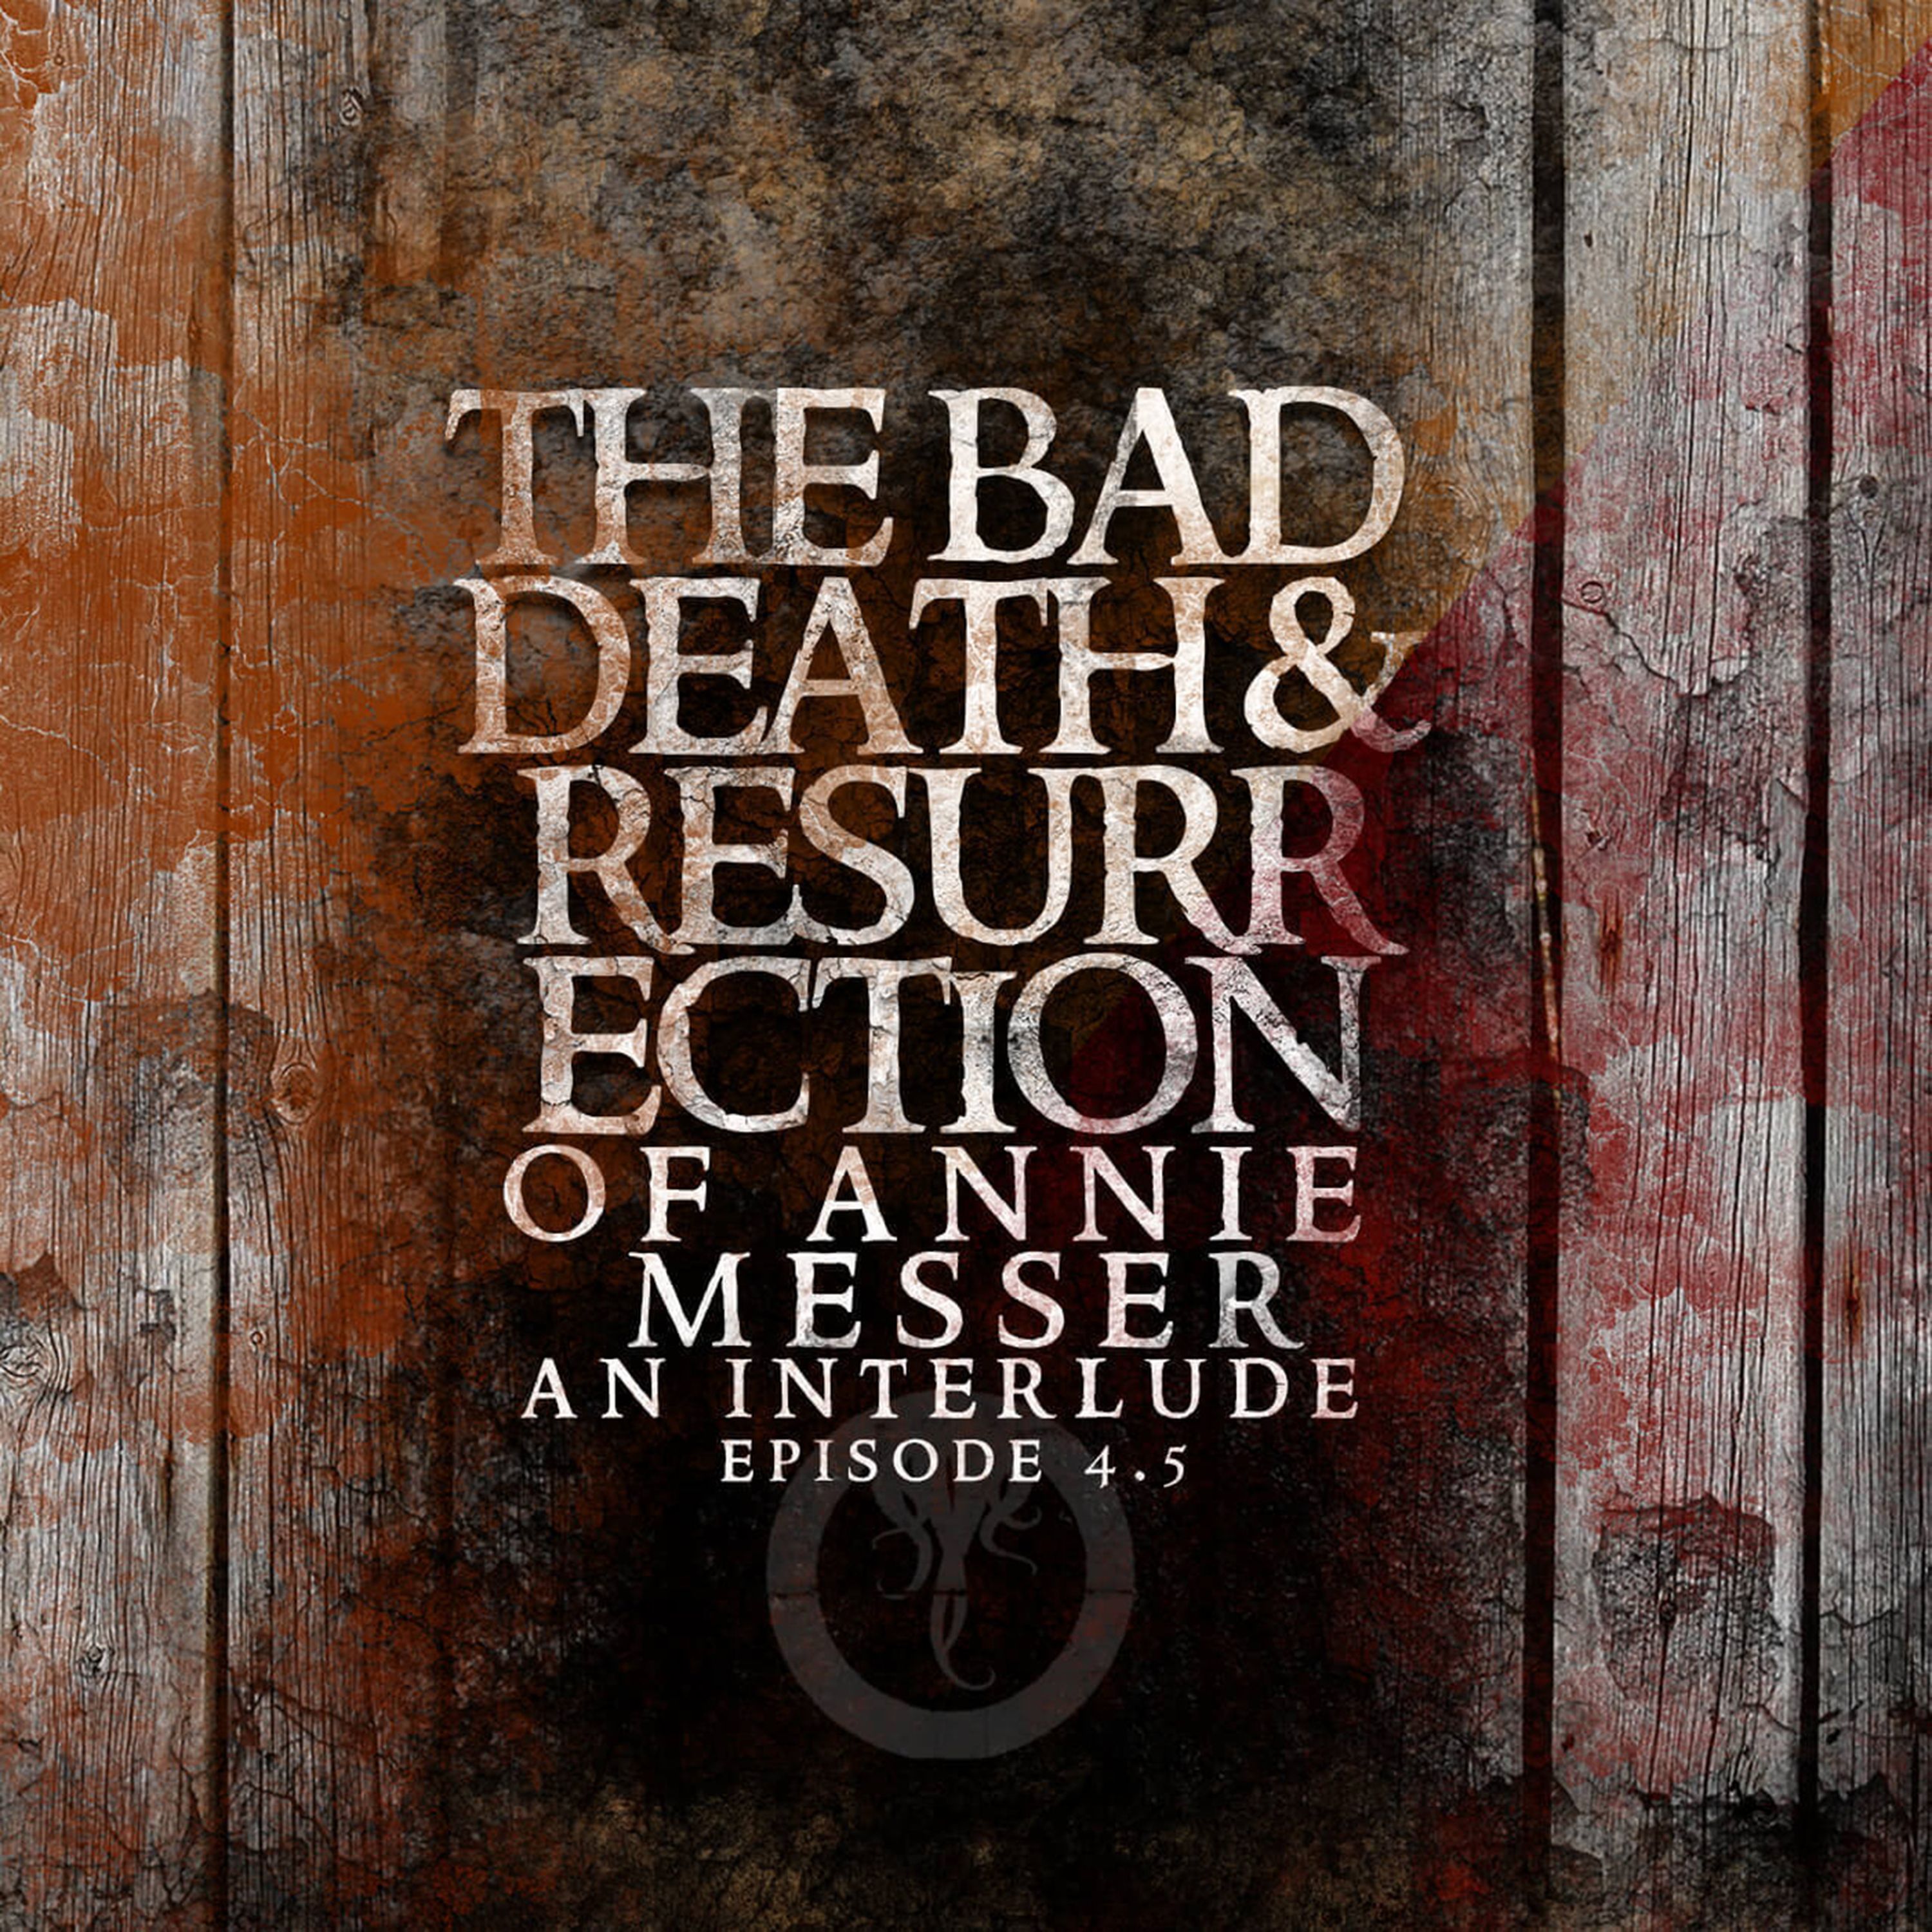 Episode 4.5: The Bad Death and Resurrection of Annie Messer